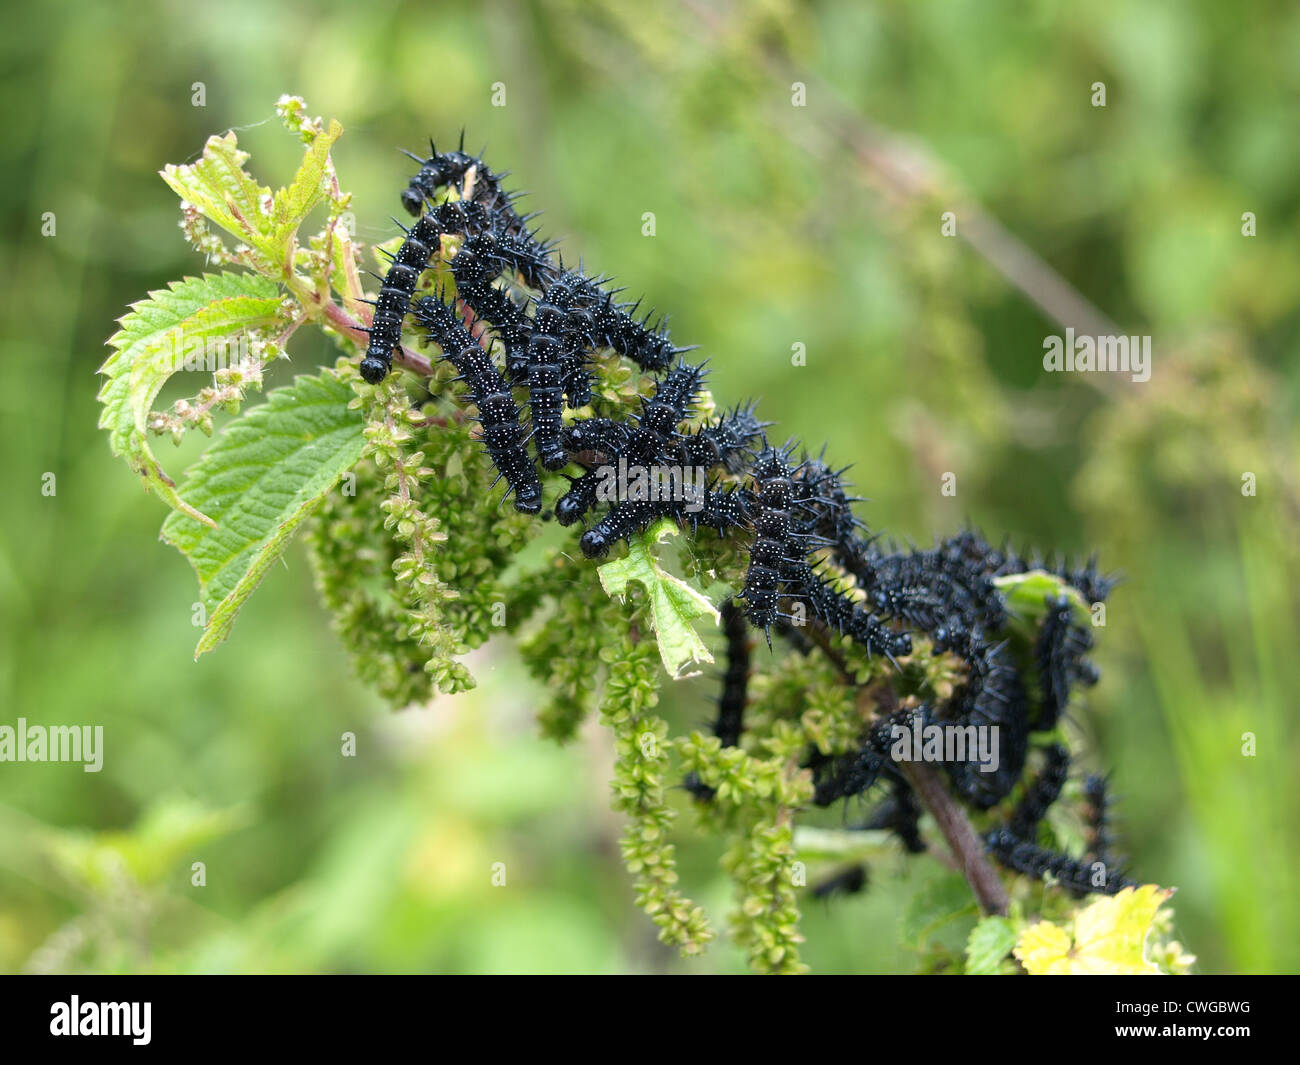 caterpillar of European Peacocl butterfly / Inachis io / Raupen vom Tagpfauenauge Stock Photo